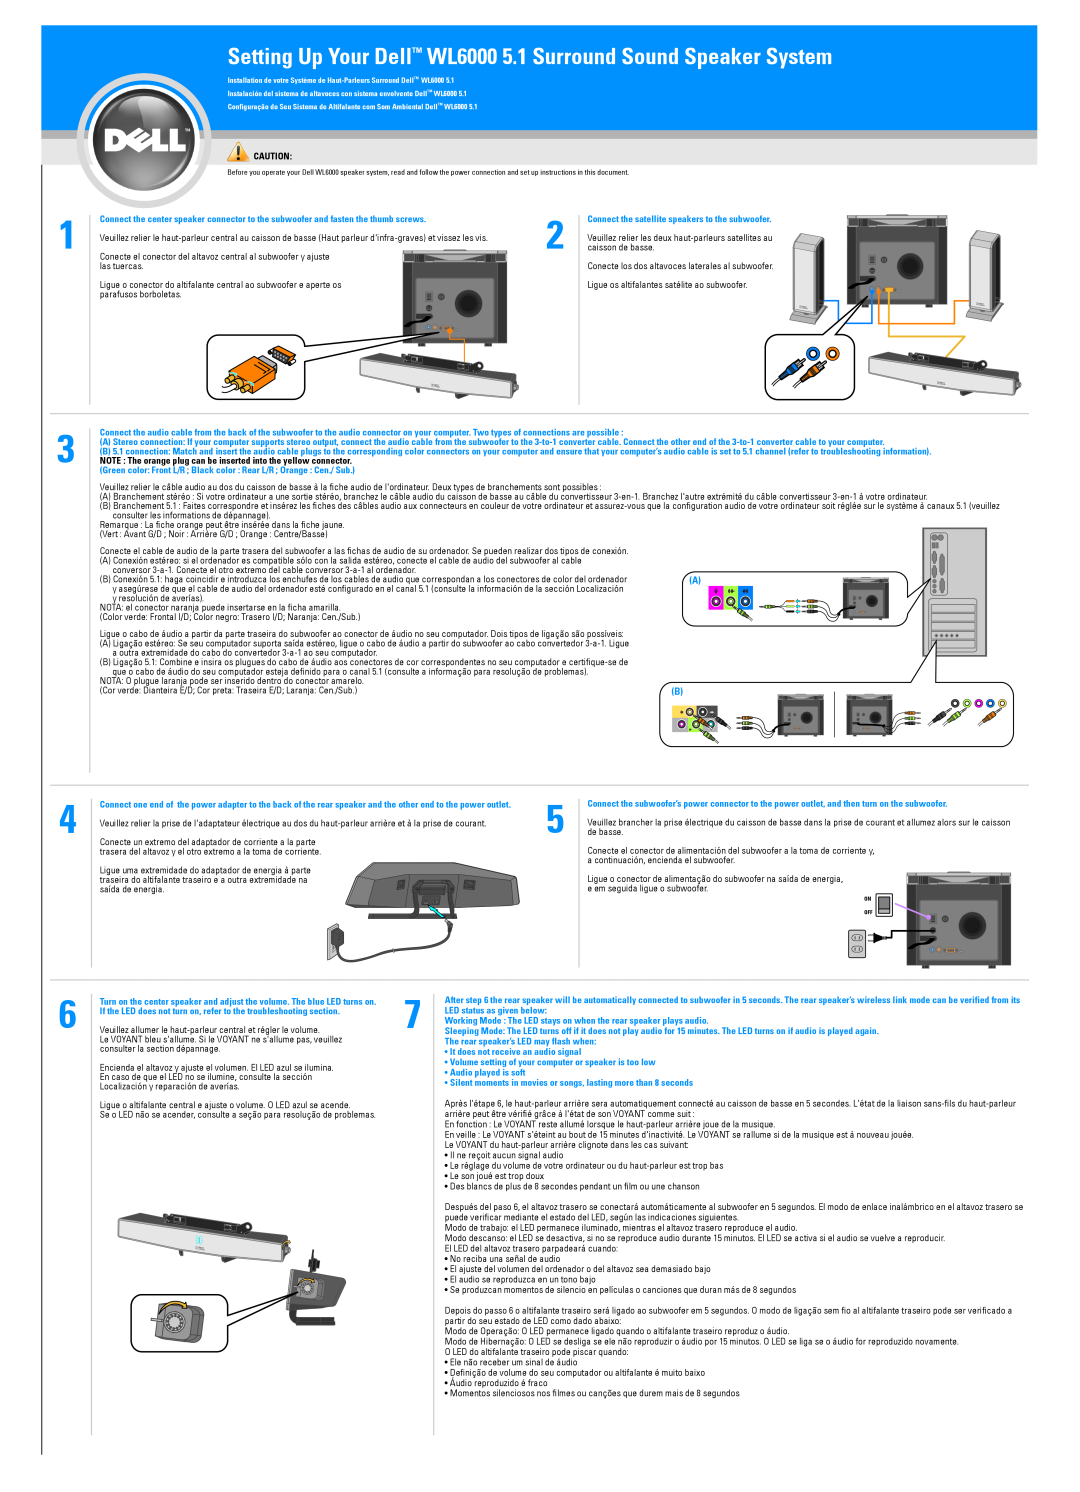 Dell manual Setting Up Your DellTM WL6000 5.1 Surround Sound Speaker System 